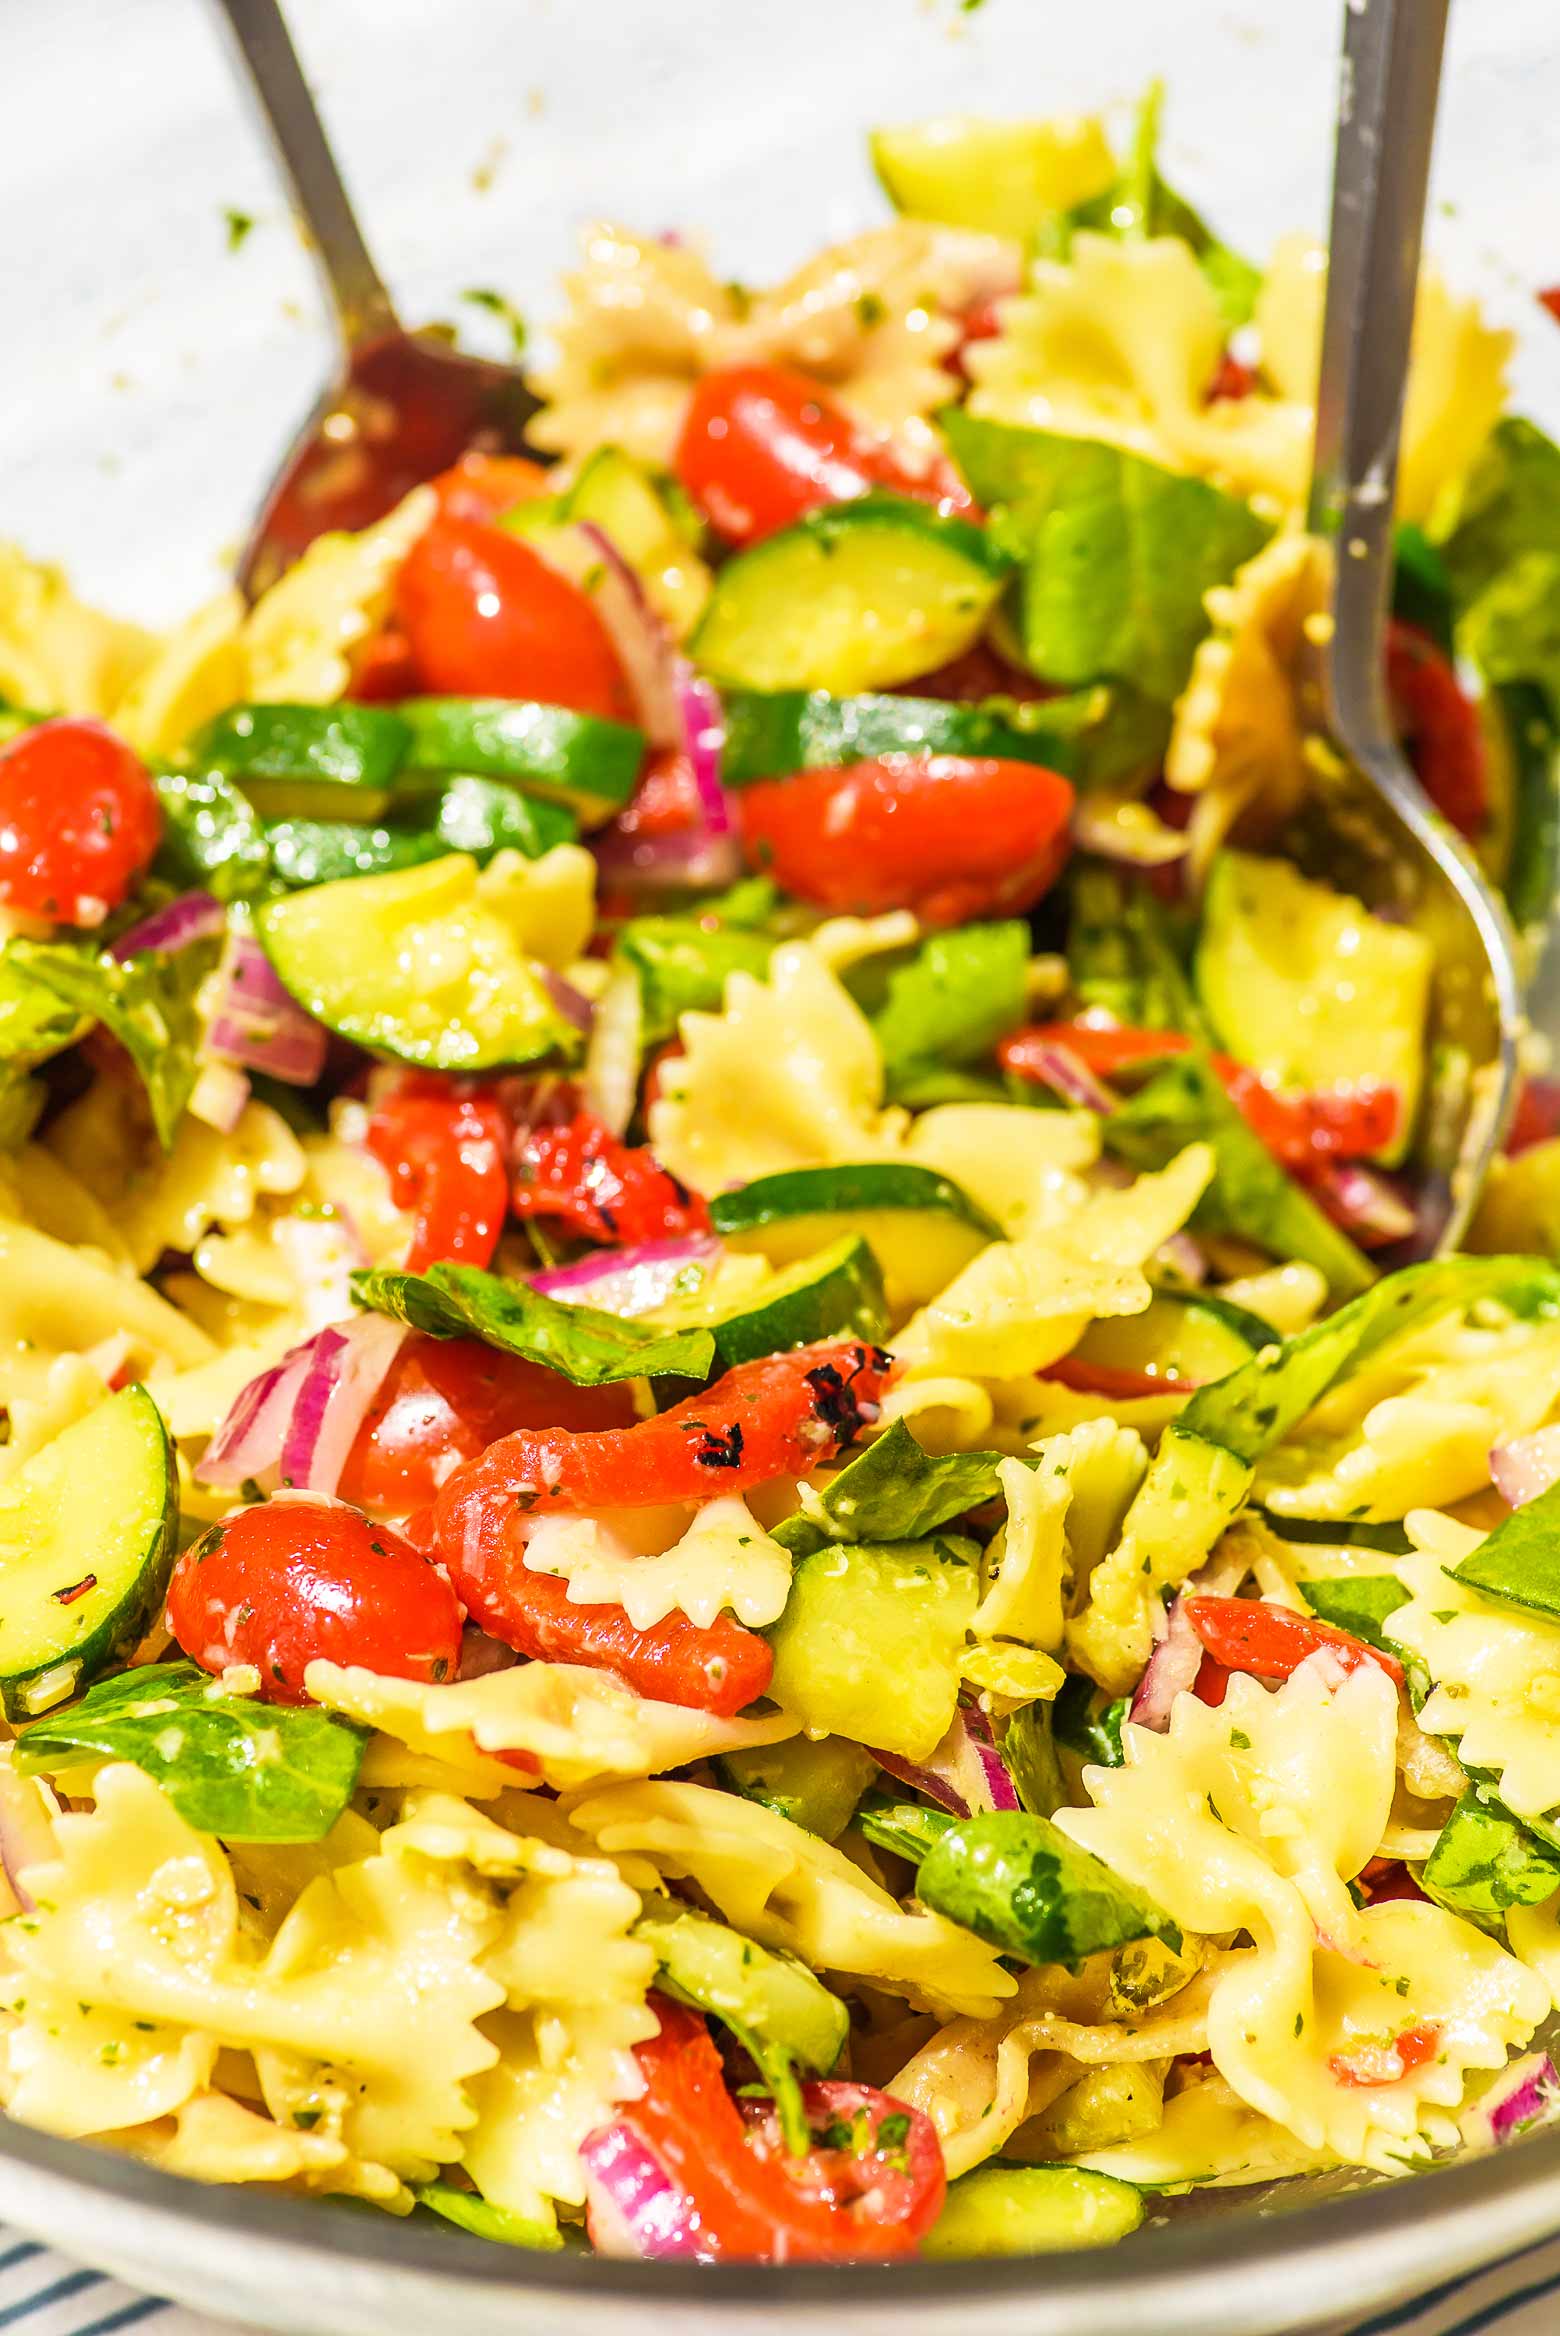 tossing up a bowl of pasta salad with red peppers and artichokes